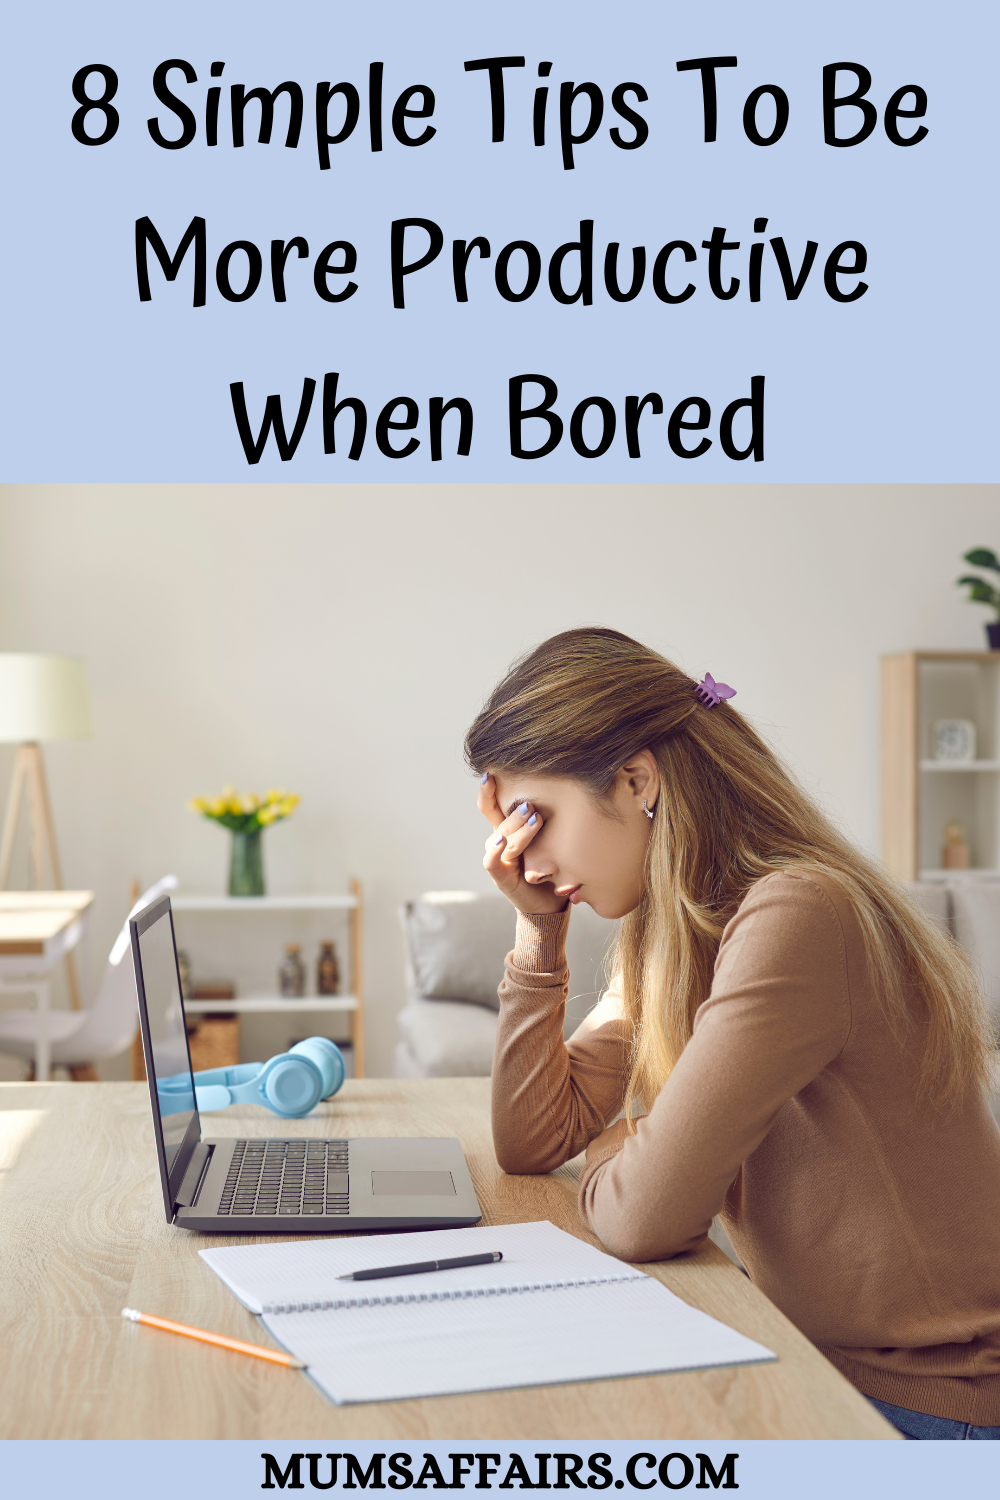 Tips to Be More Productive When Bored